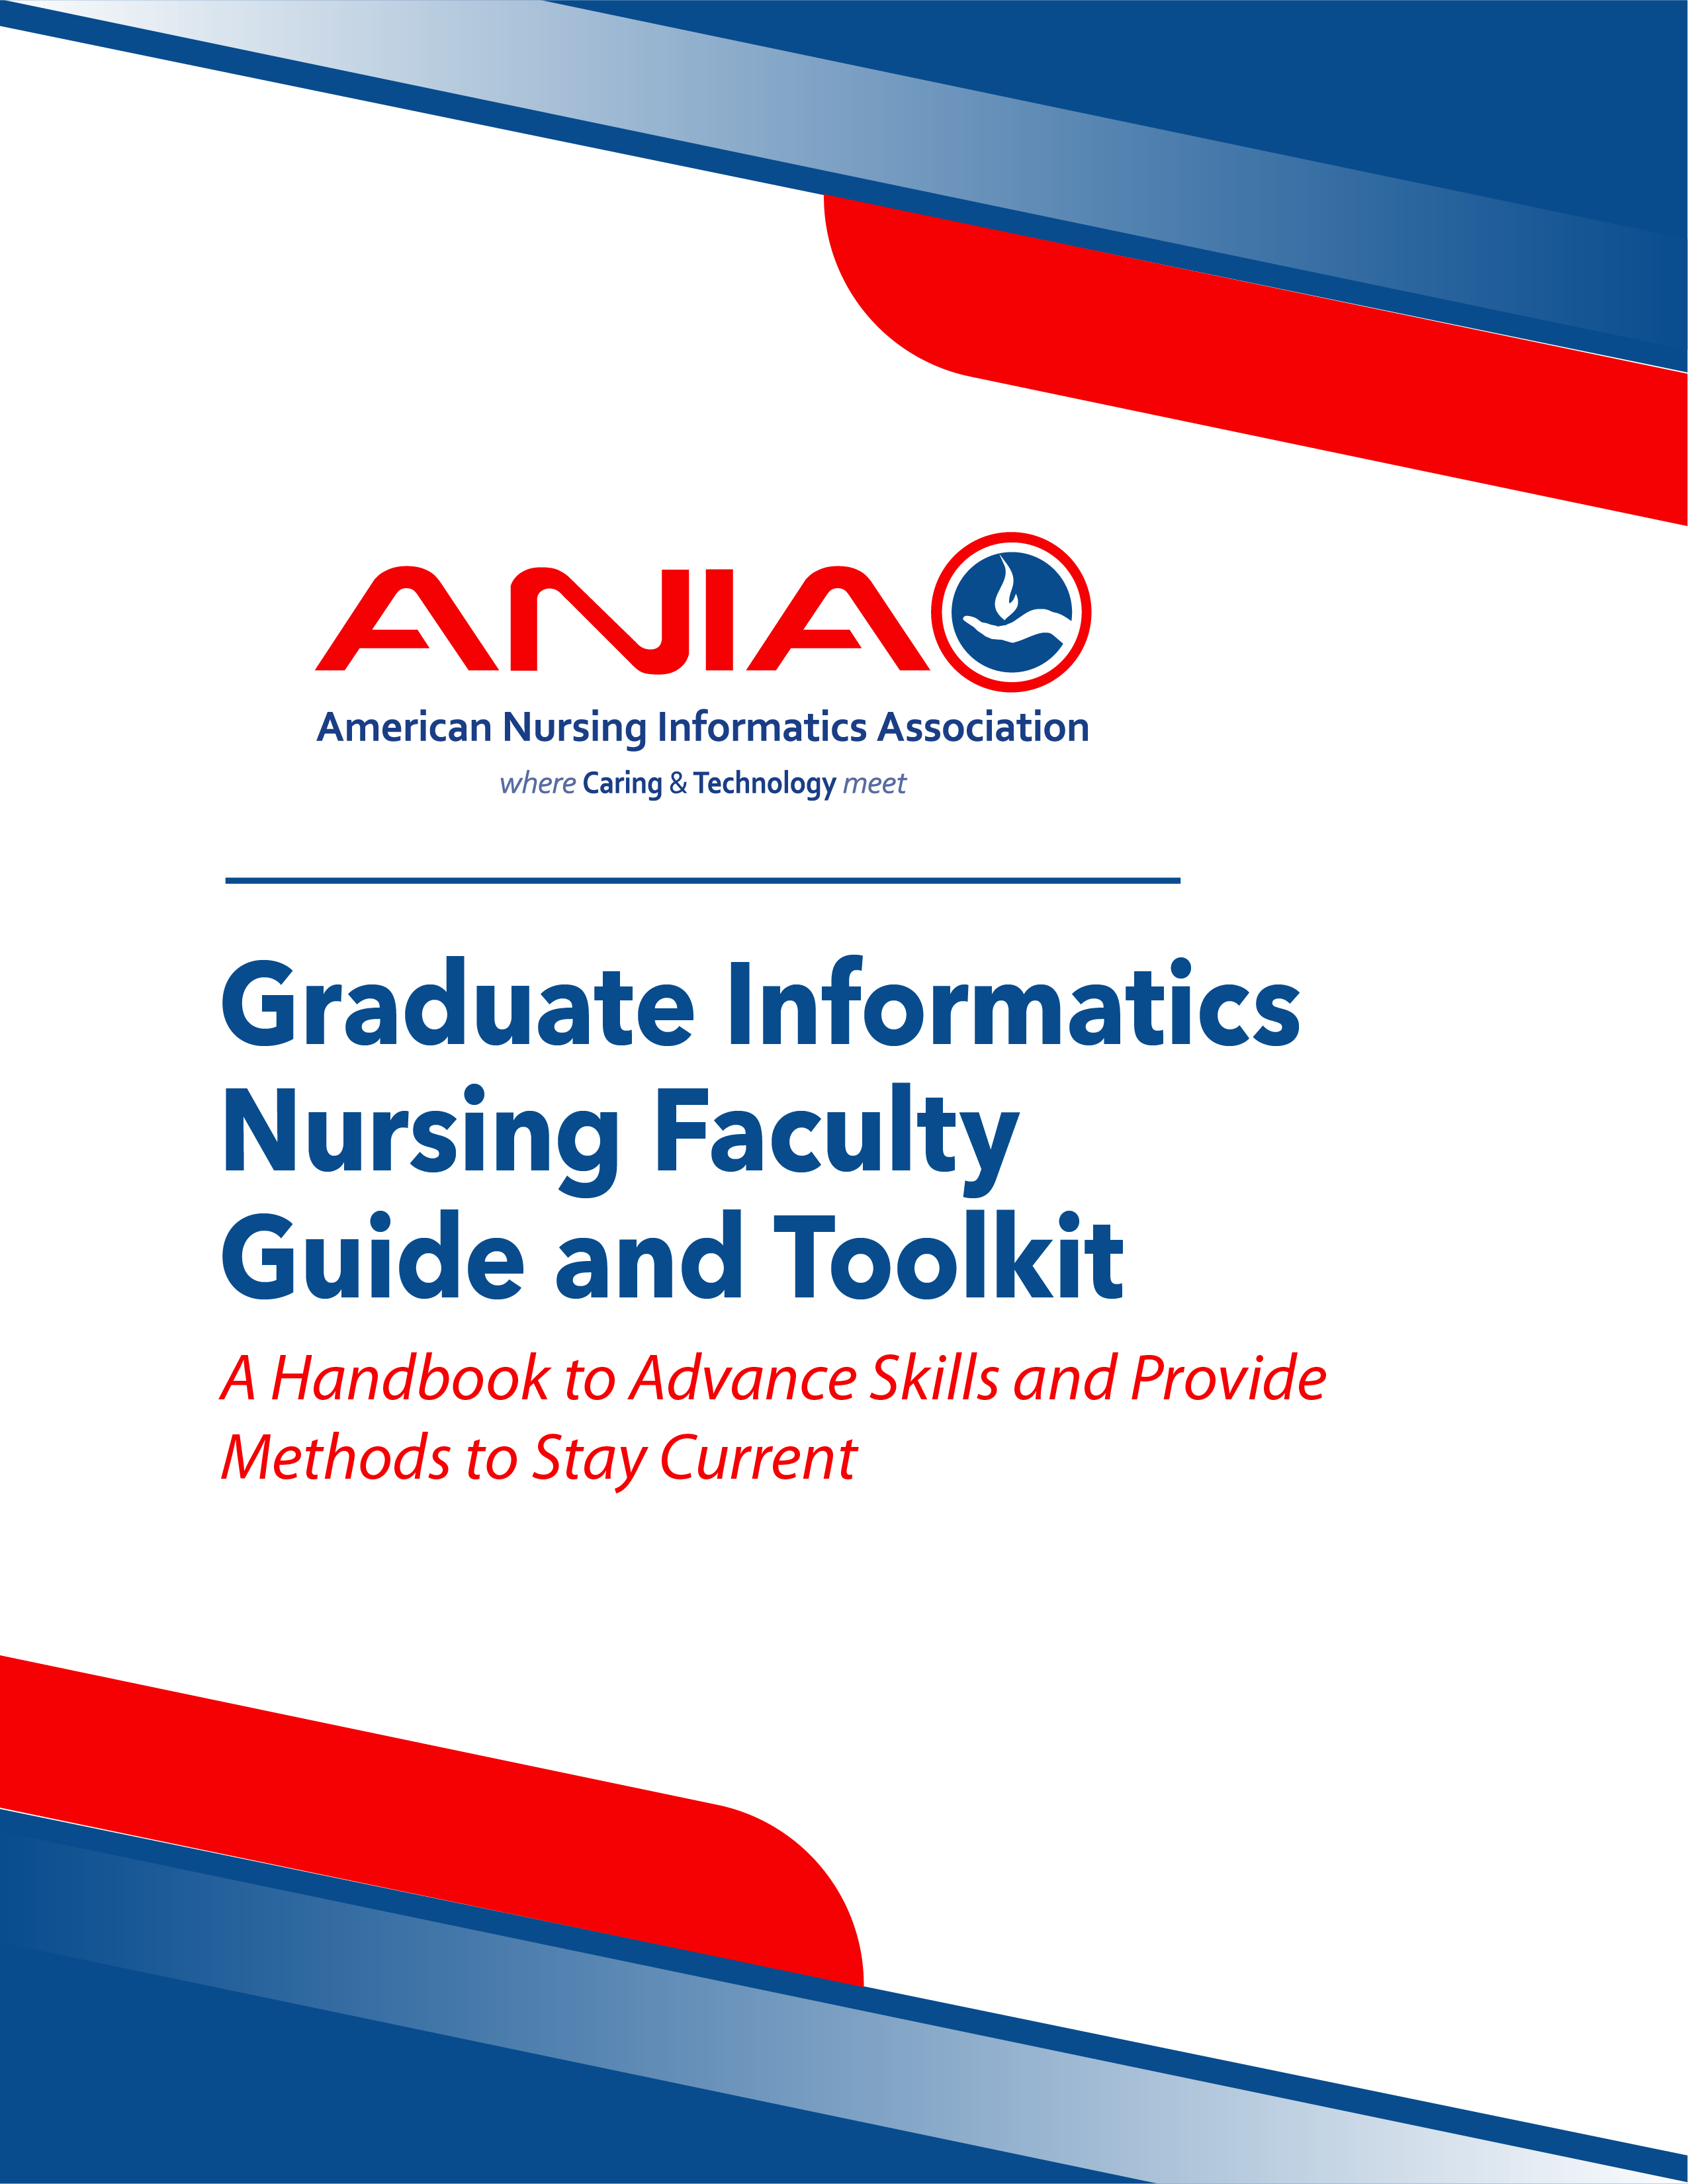 ANIA Graduate Informatics Nursing Faculty Guide and Toolkit